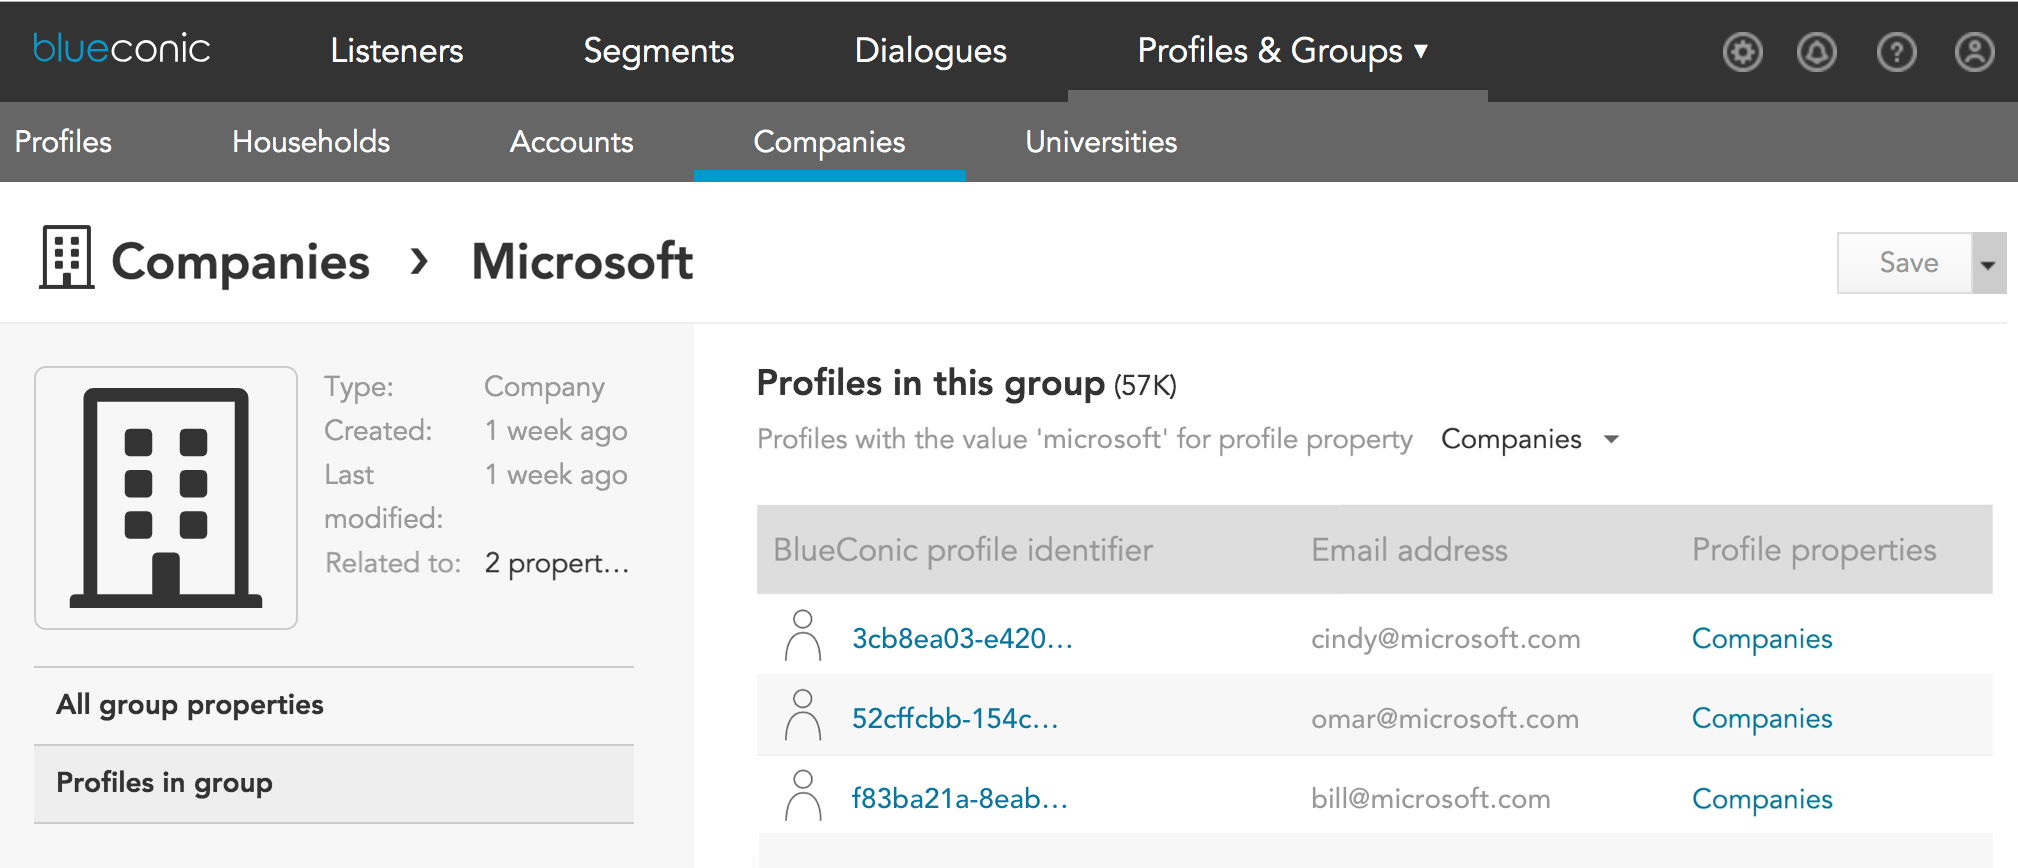 groups_profiles_in_group_microsoft.png